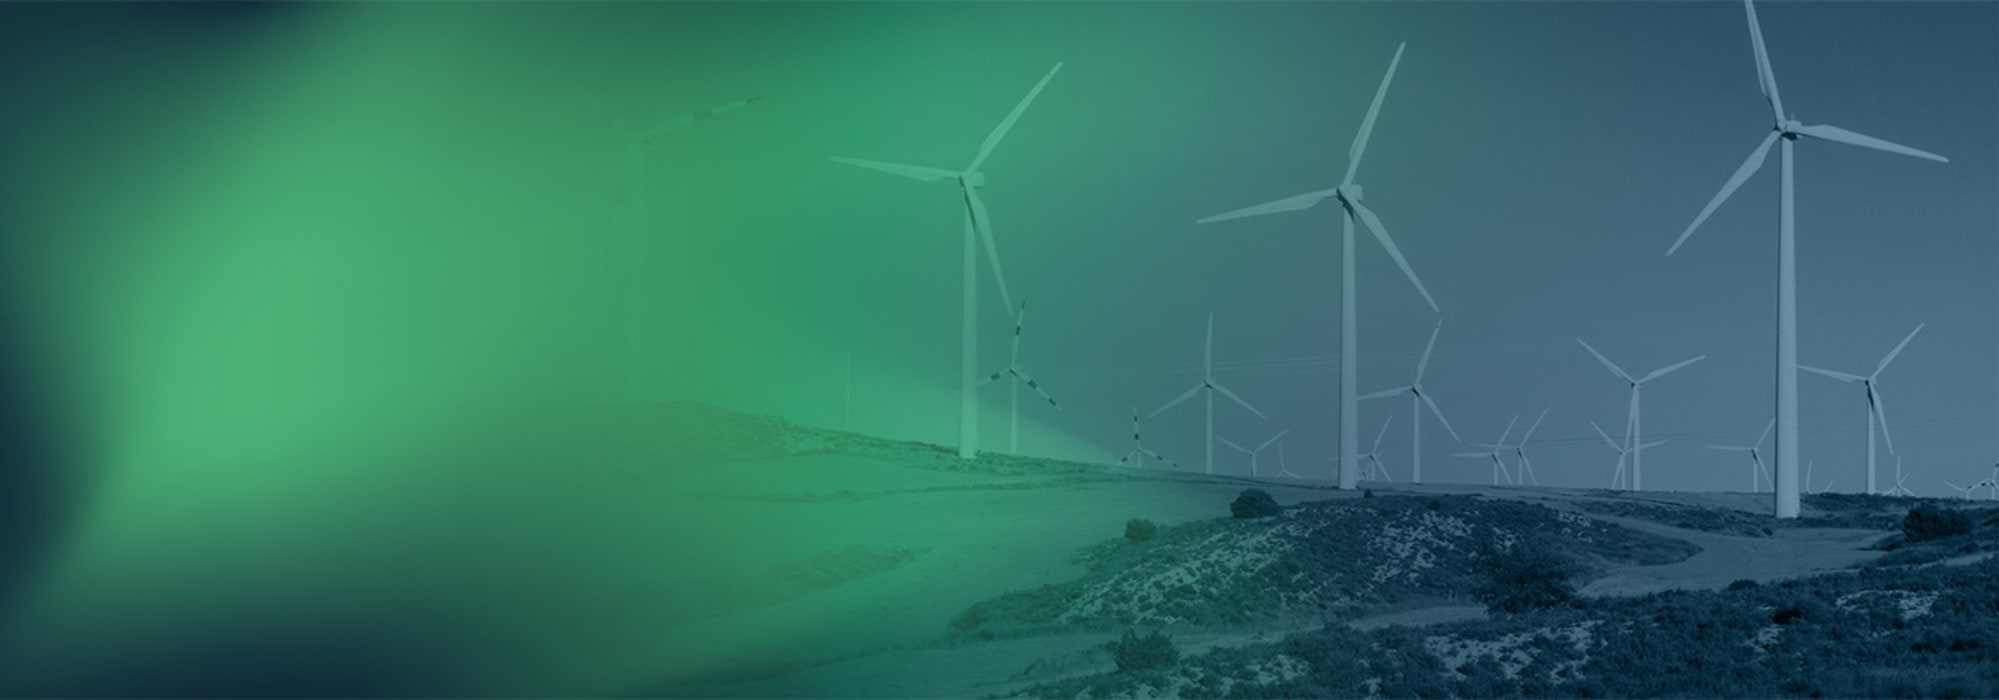 idex consulting sustainability page banner